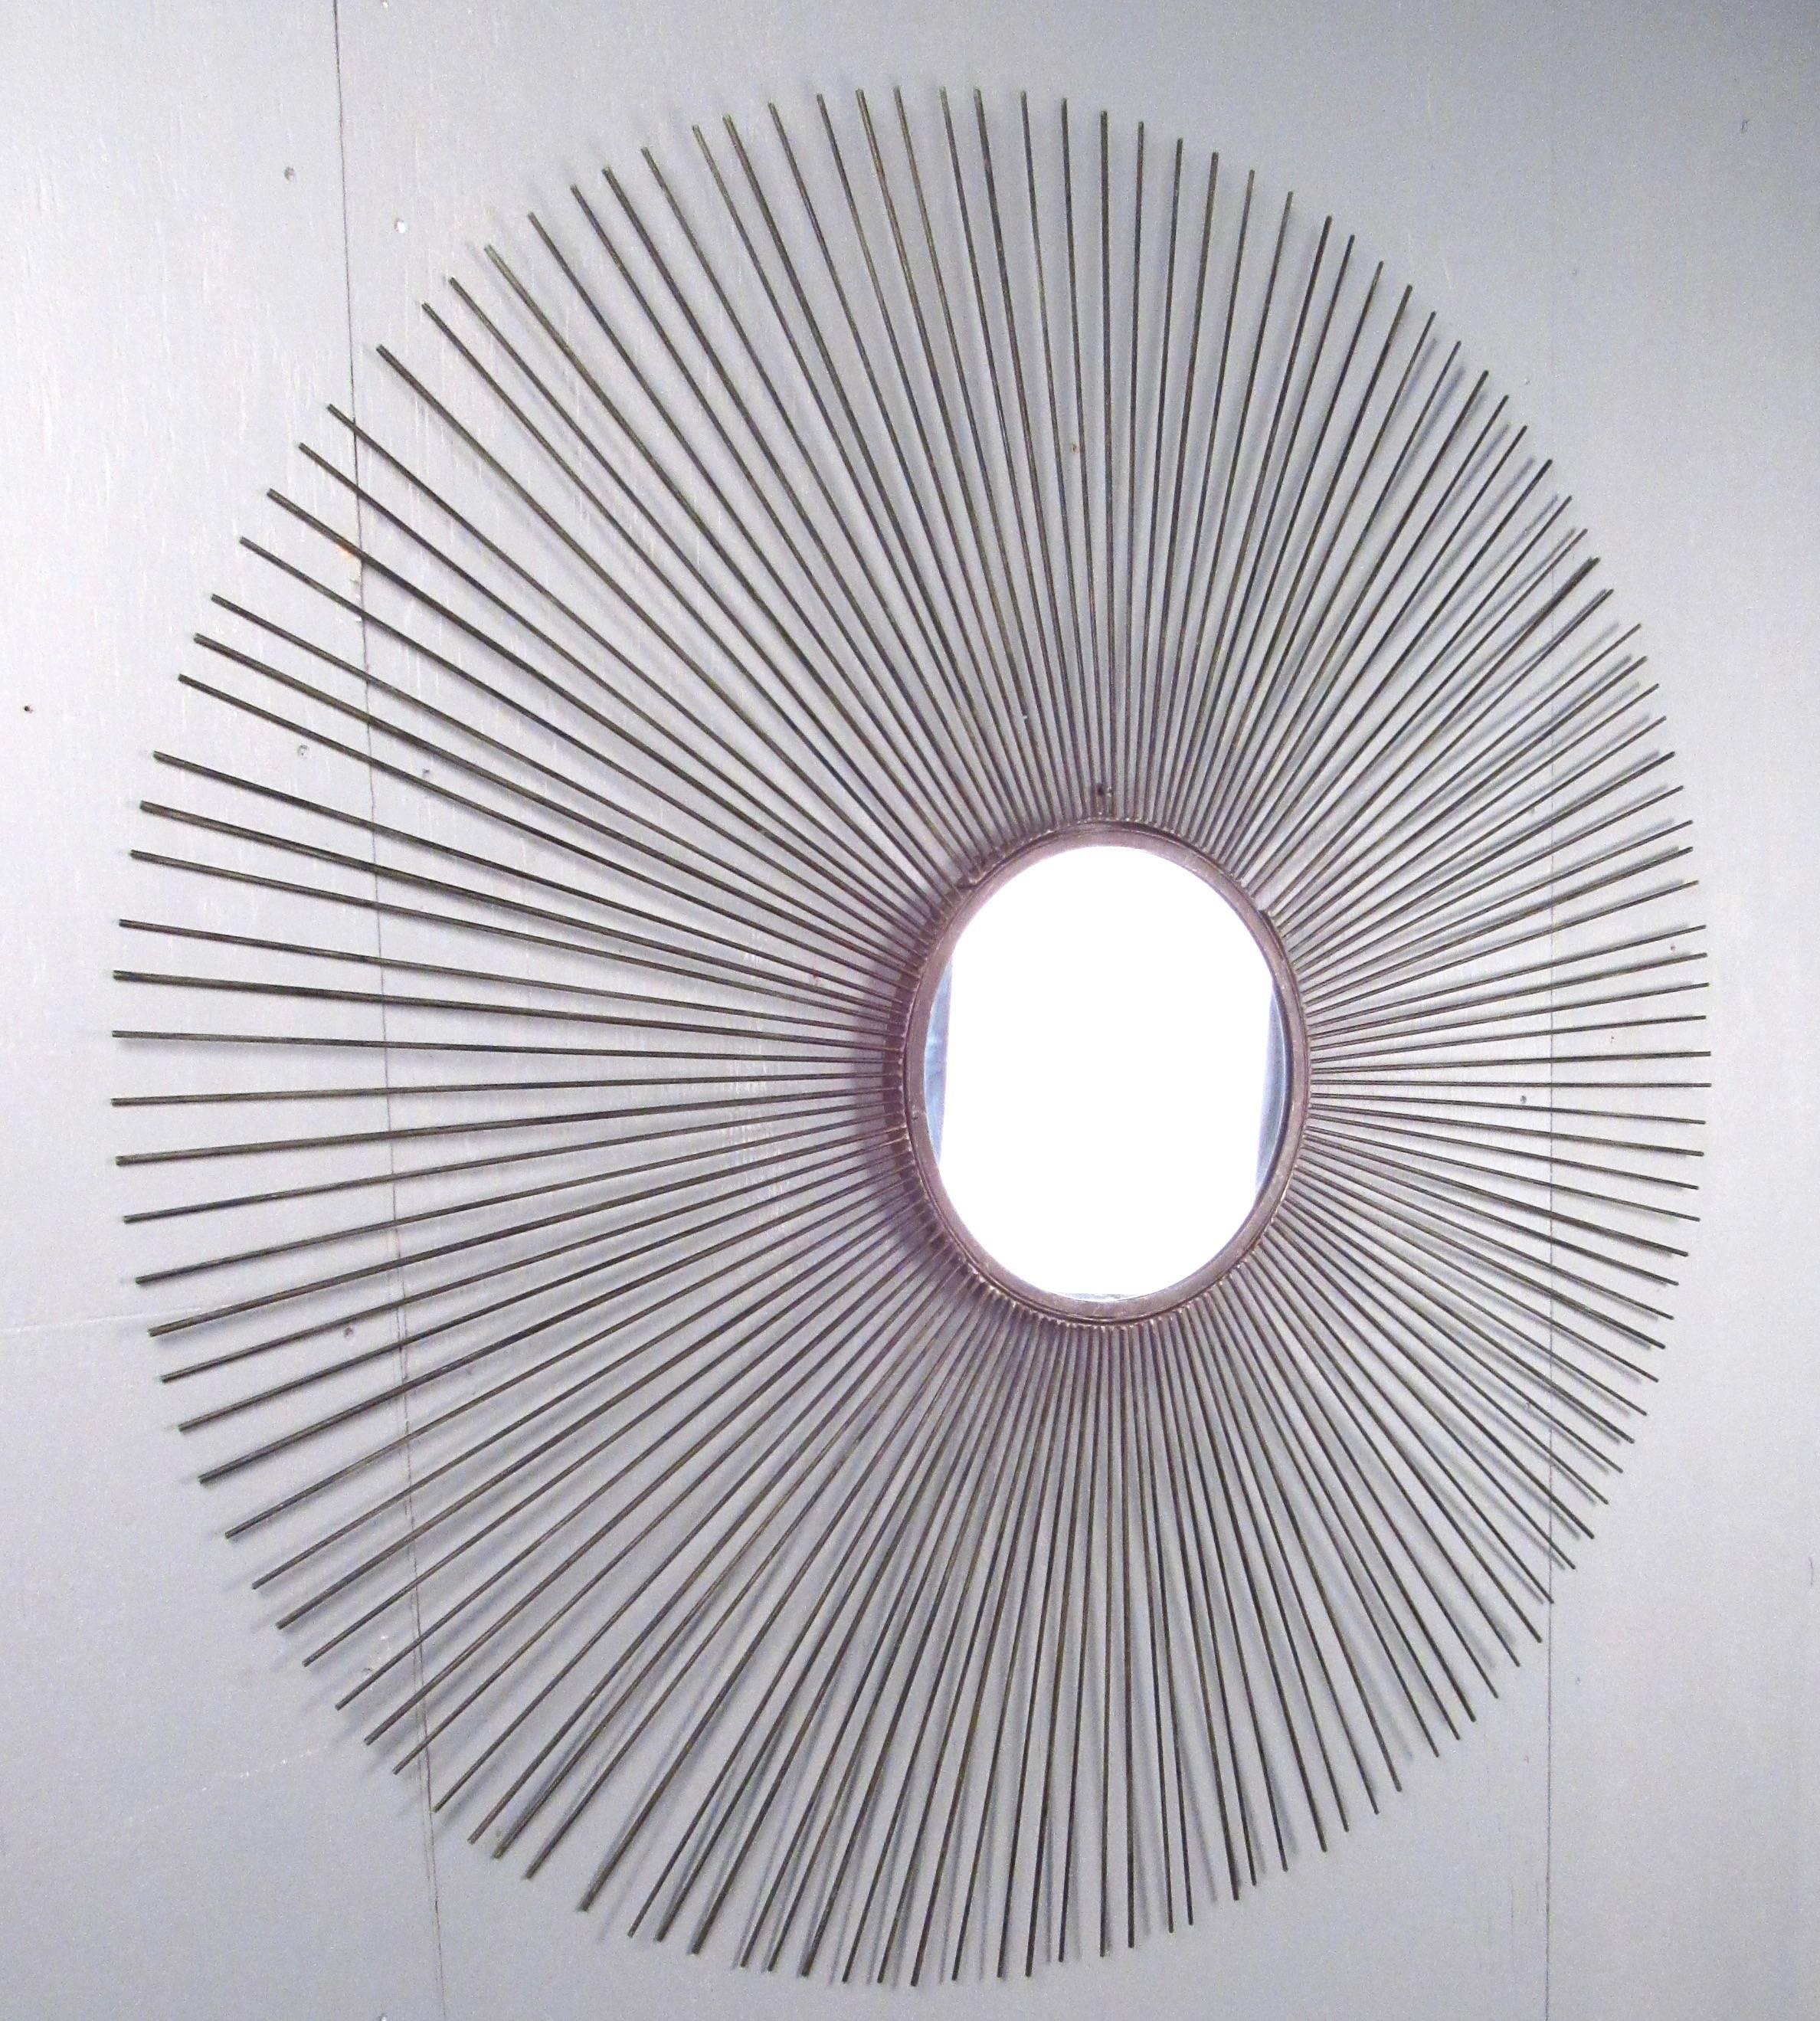 This large starburst mirror features elegant iron spokes around a small centre mirror. This impressive Mid-Century design makes this stellar sunburst design a beautiful addition to any home or office. Please confirm item location (NY or NJ).